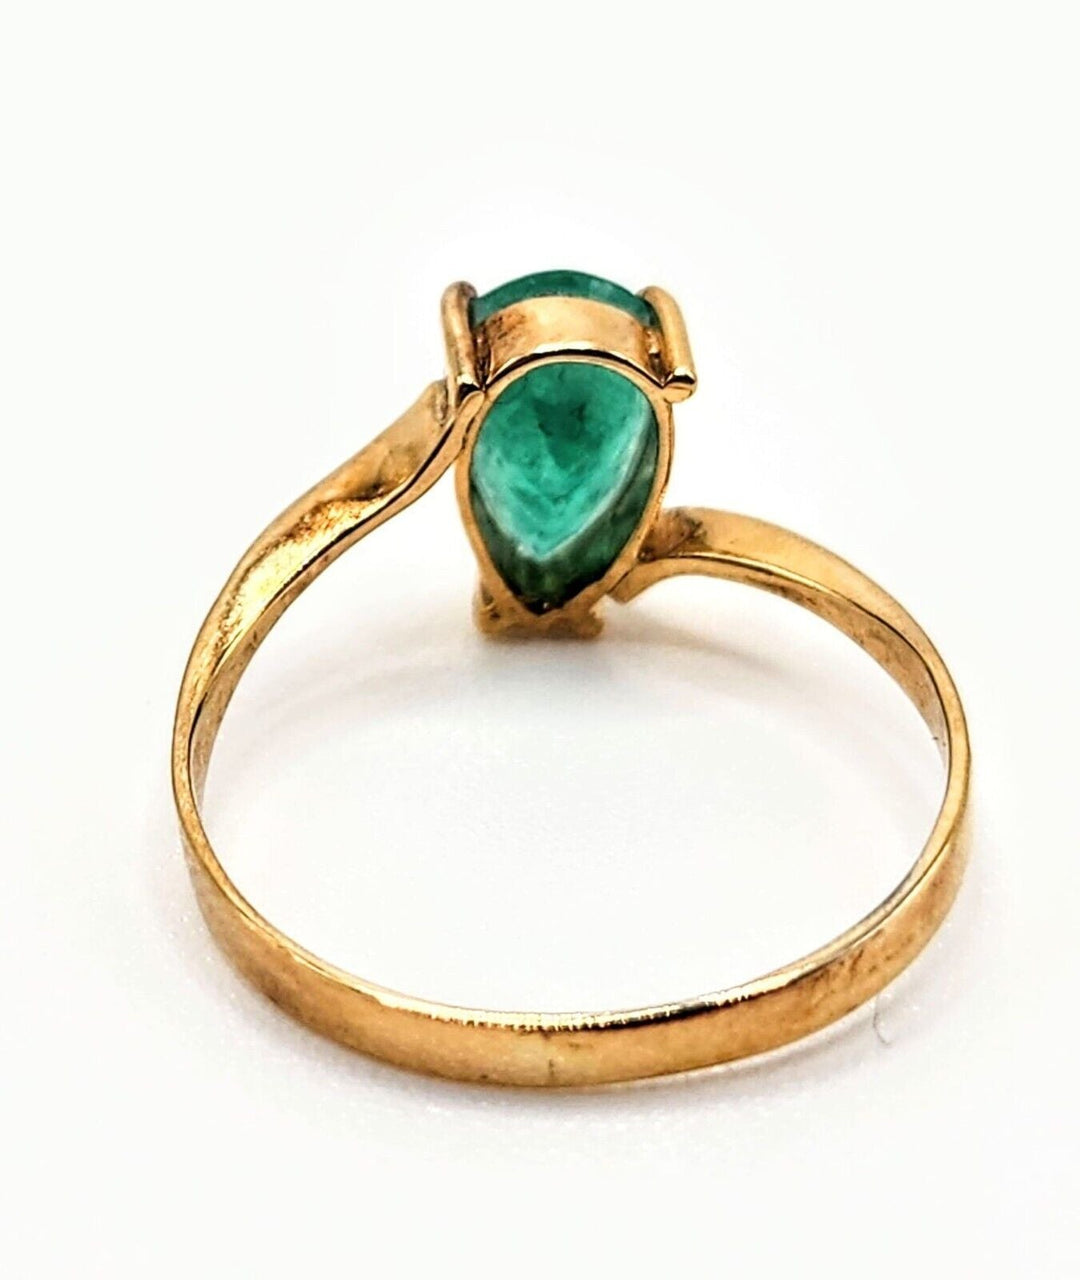 1.24 Carat Naturally Mined Untreated Colombian Emerald Ring in 18K Gold ICG Cert - JDColFashion